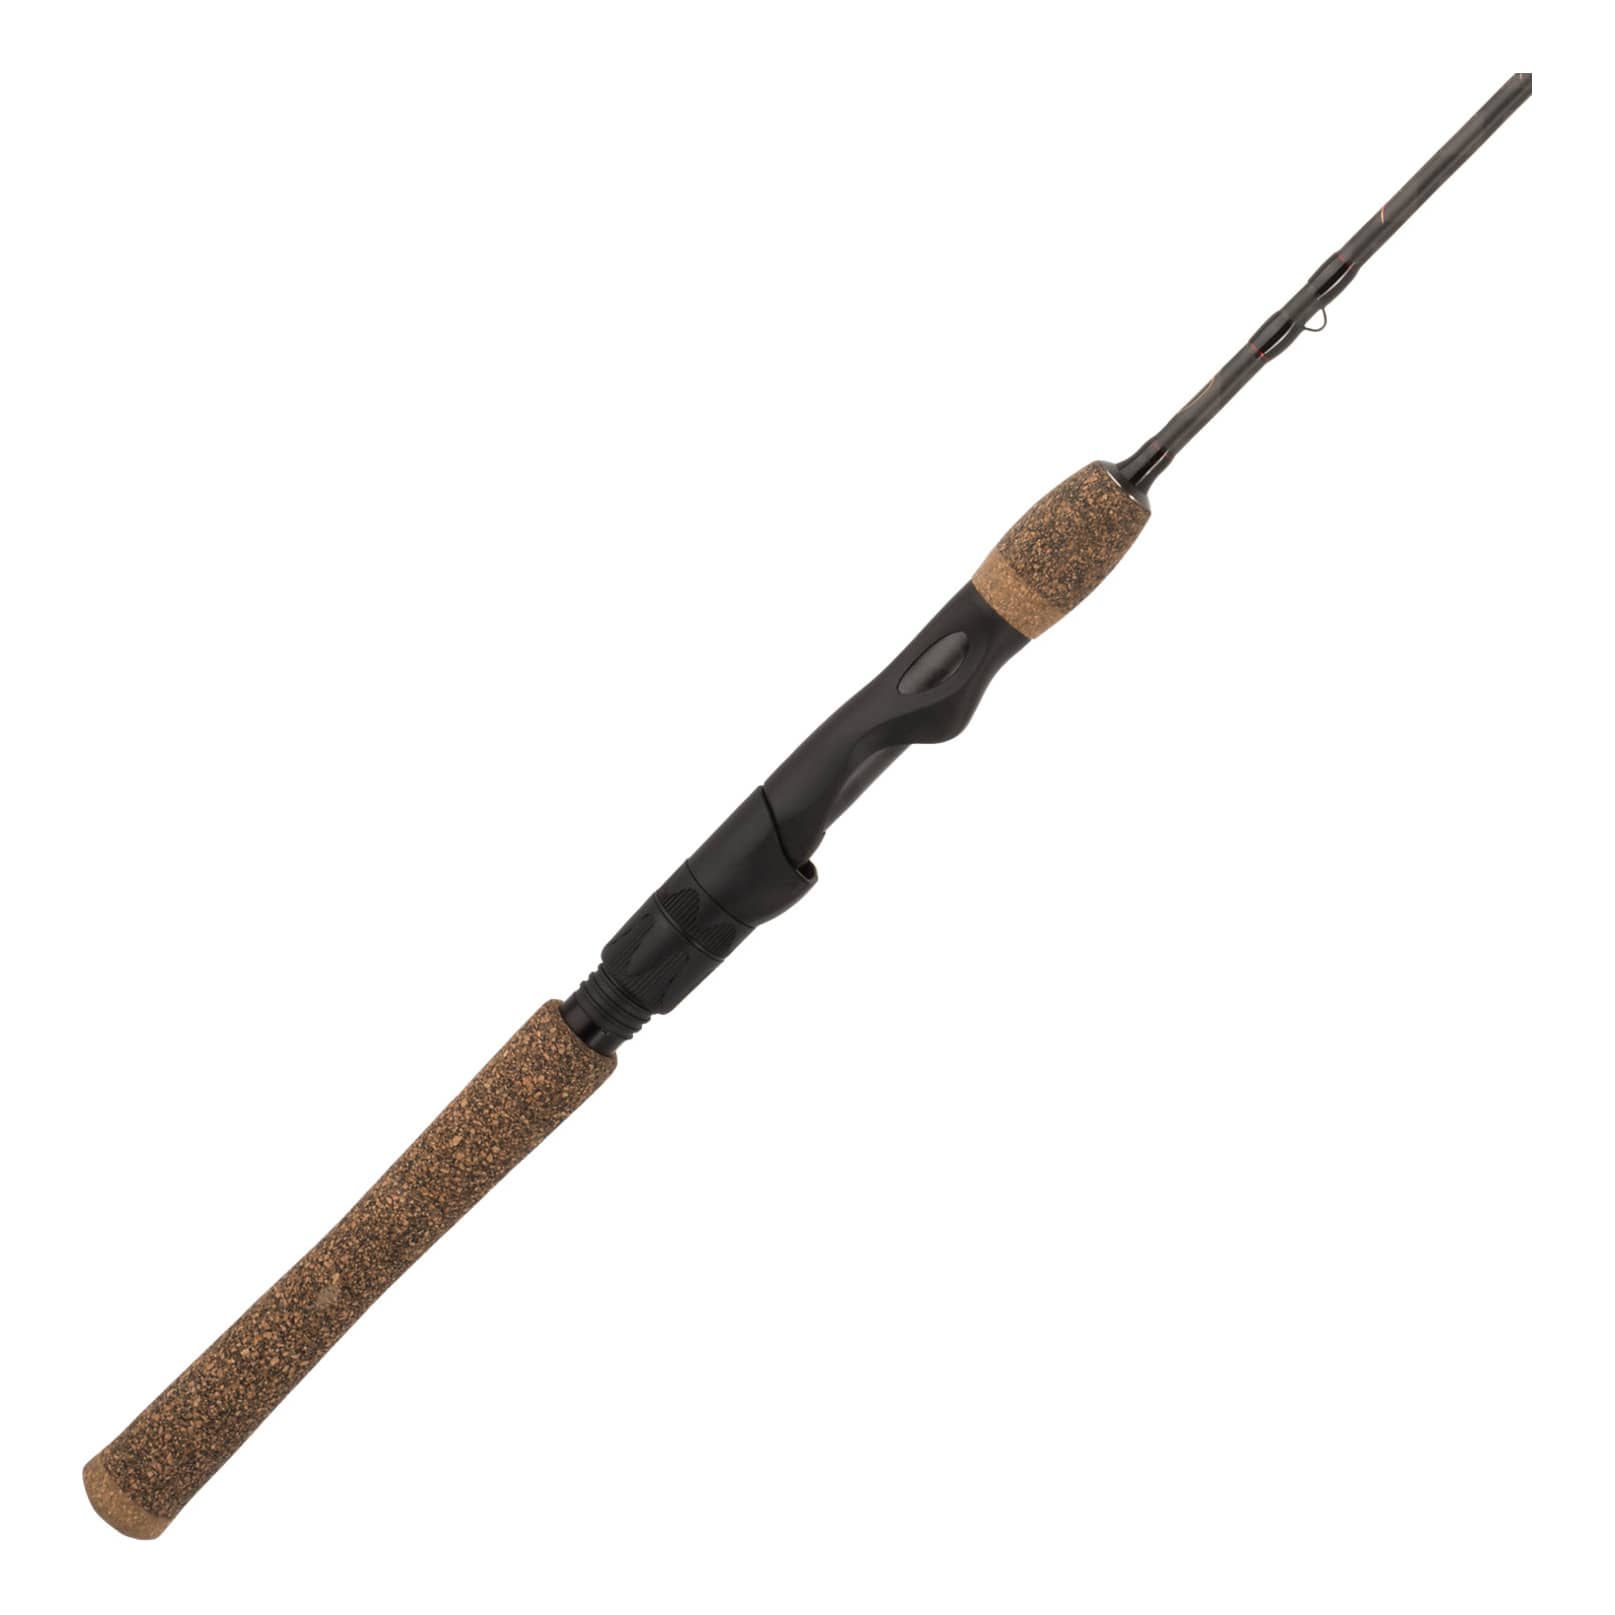 Bass Pro Shops® Fish Eagle Spinning Rod